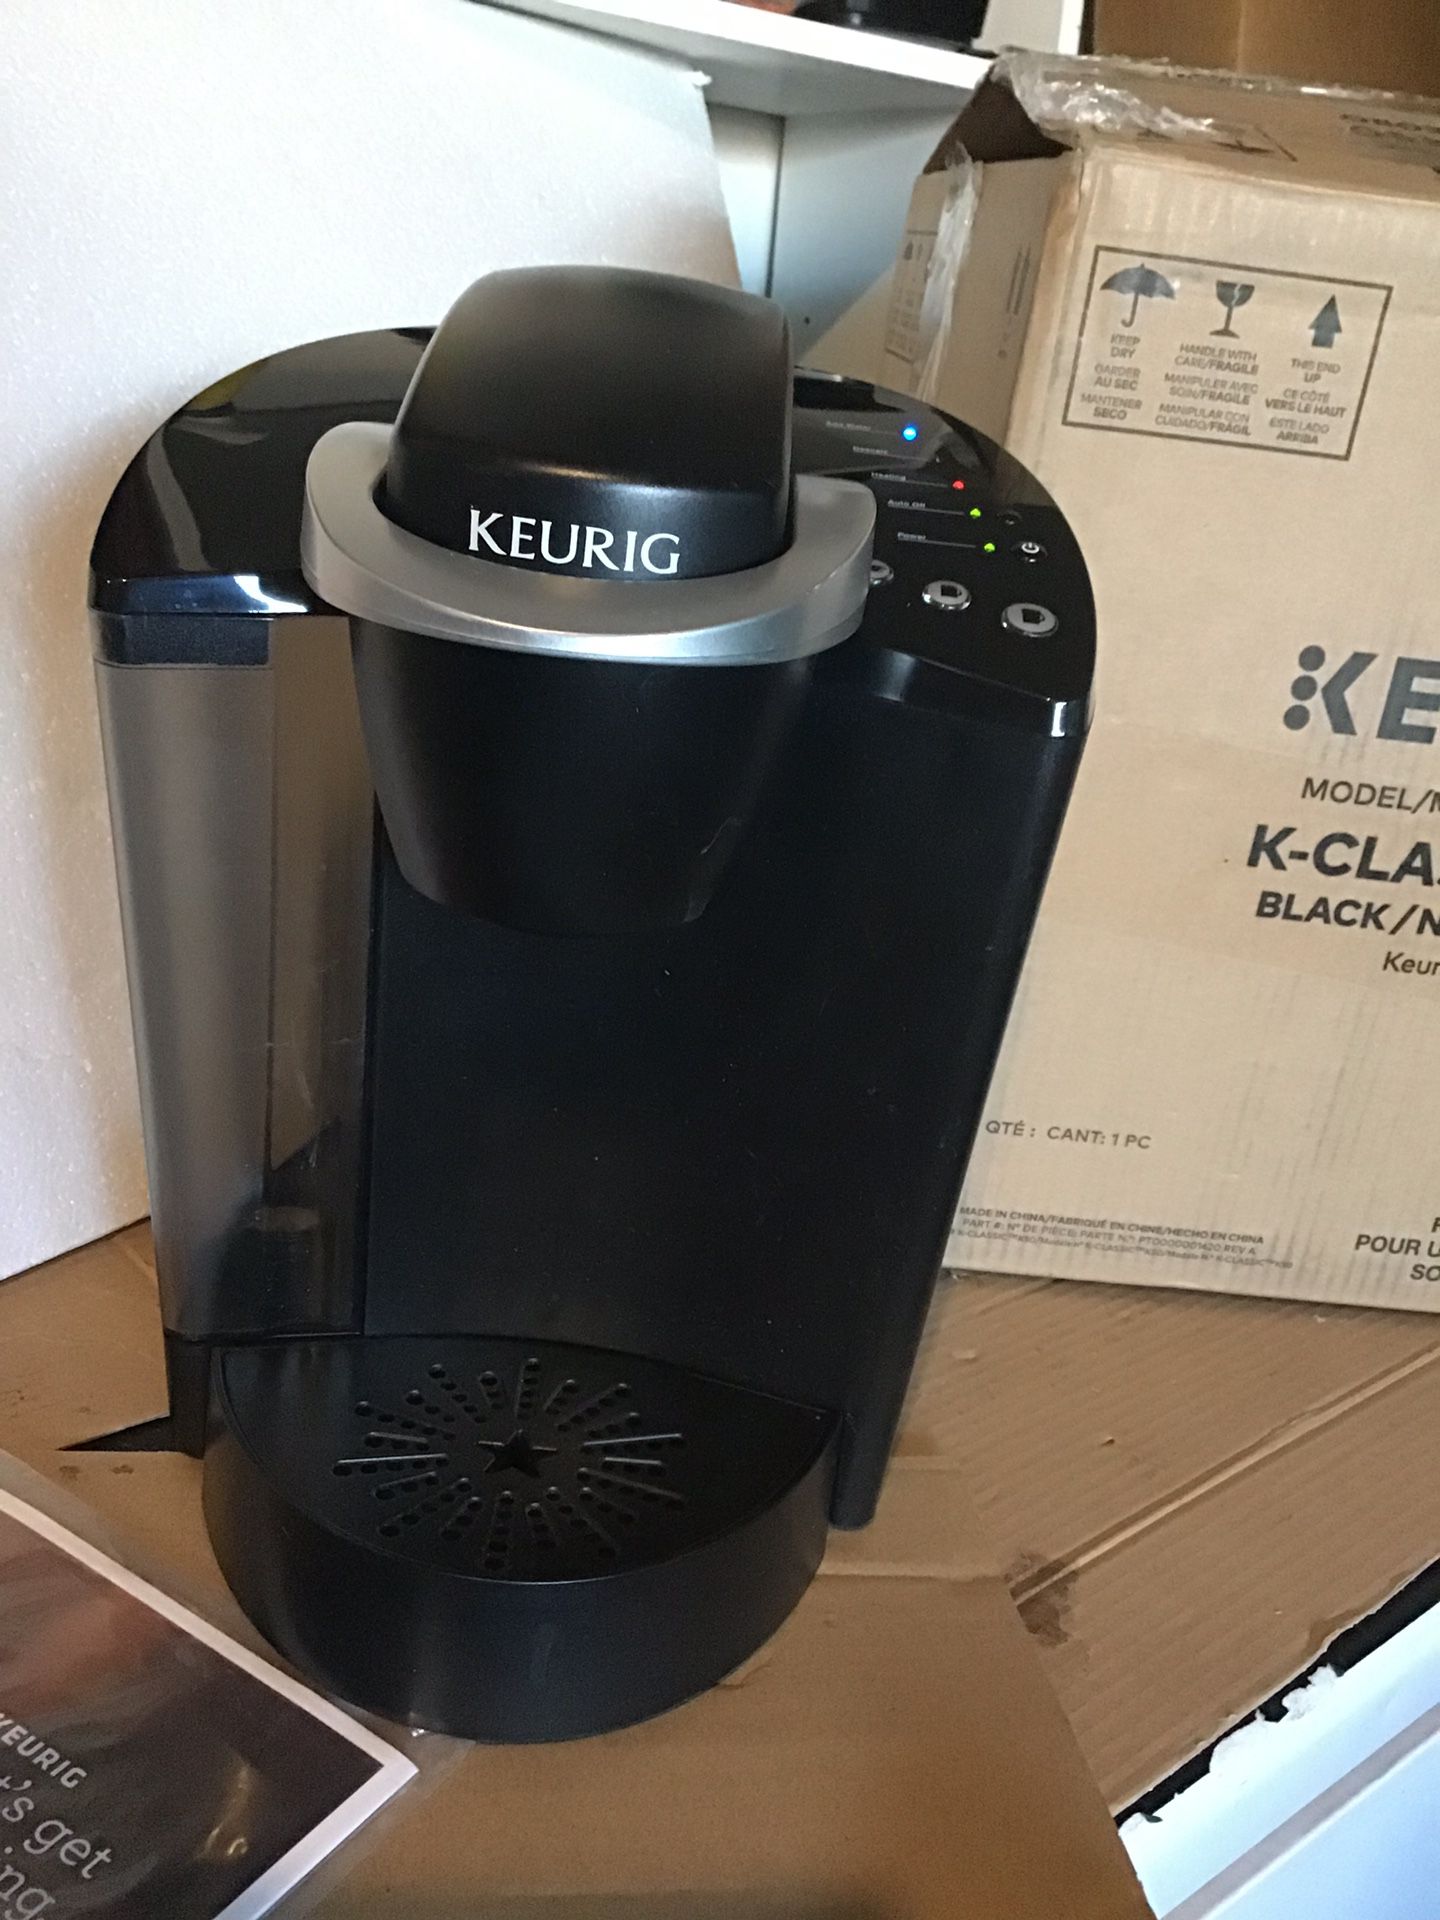 Keurig K50 classic black k cup single serve coffee maker open box excellent condition in original packaging. Never used